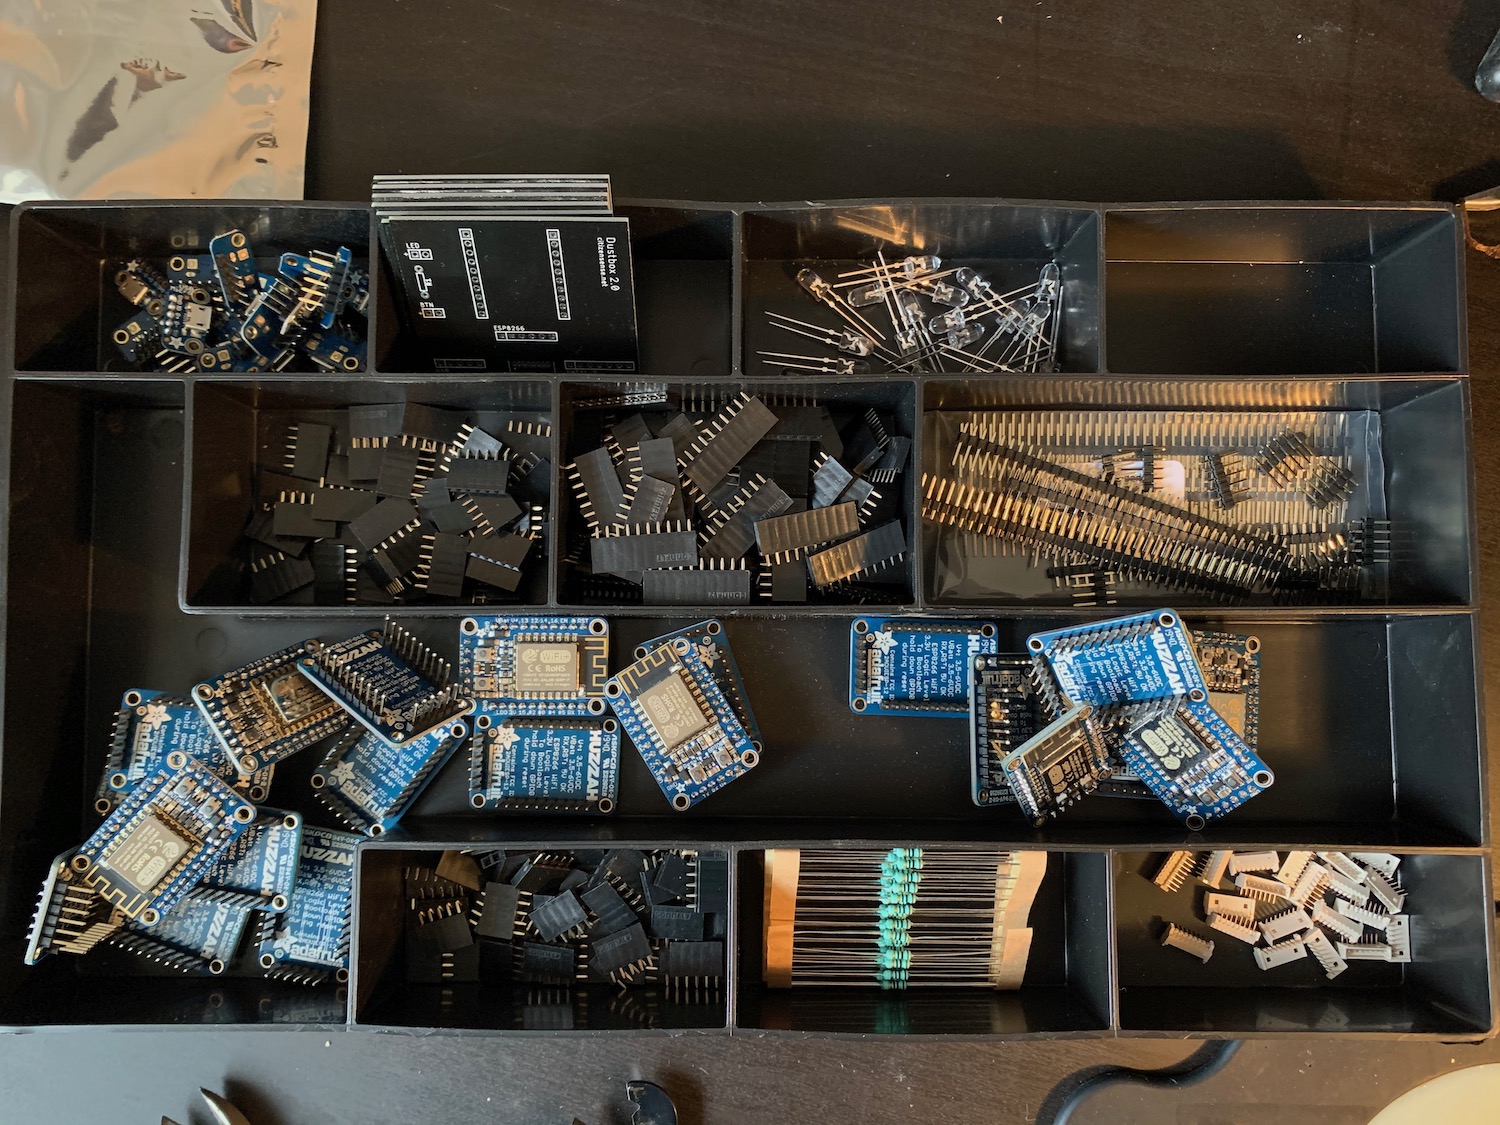 An overhead view of a tray containing sensors, resistors and other electronics parts